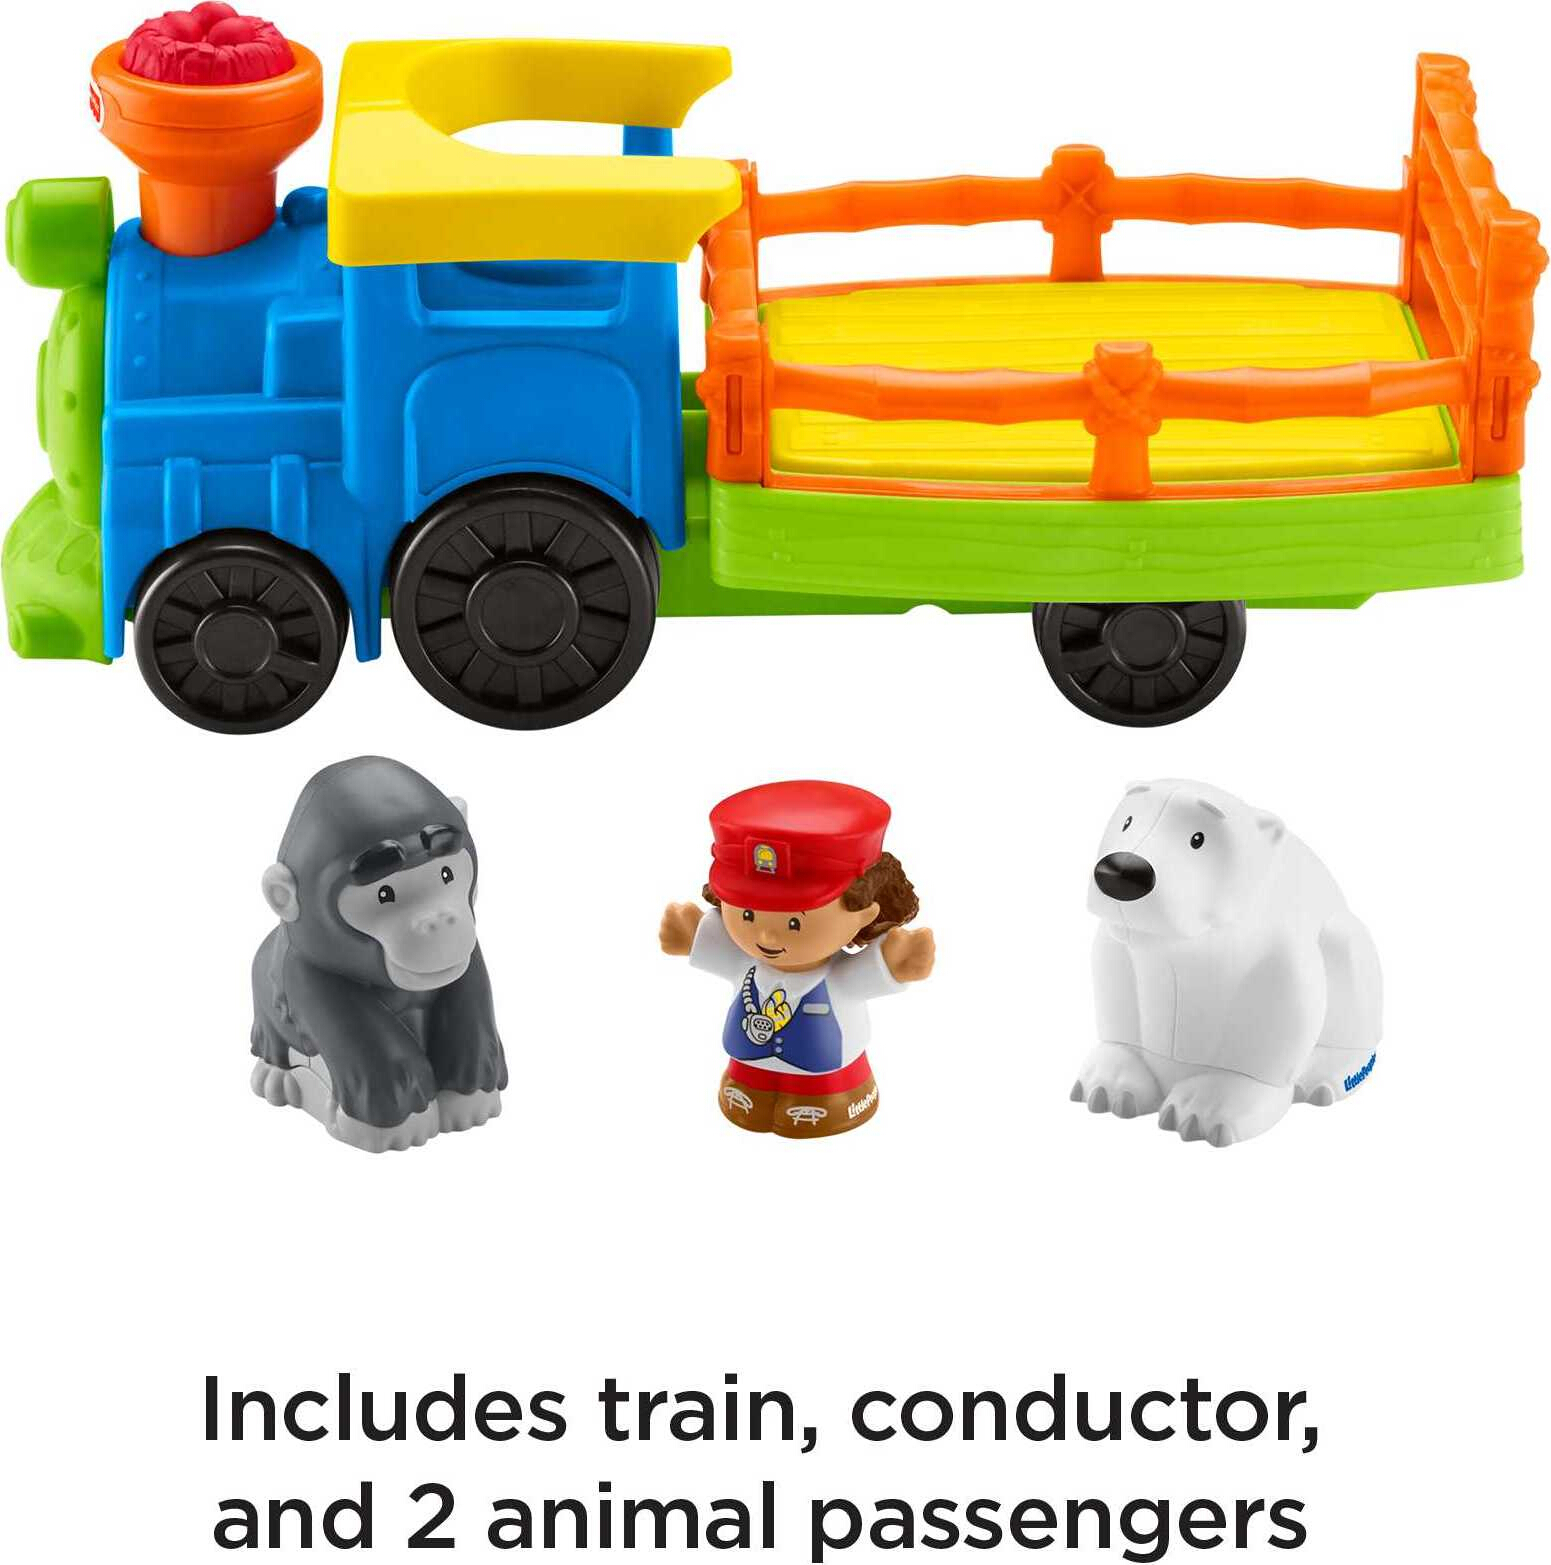 Fisher-Price Little People Choo-Choo Zoo Train with Music and Sounds for Toddlers, 3 Figures - image 5 of 7